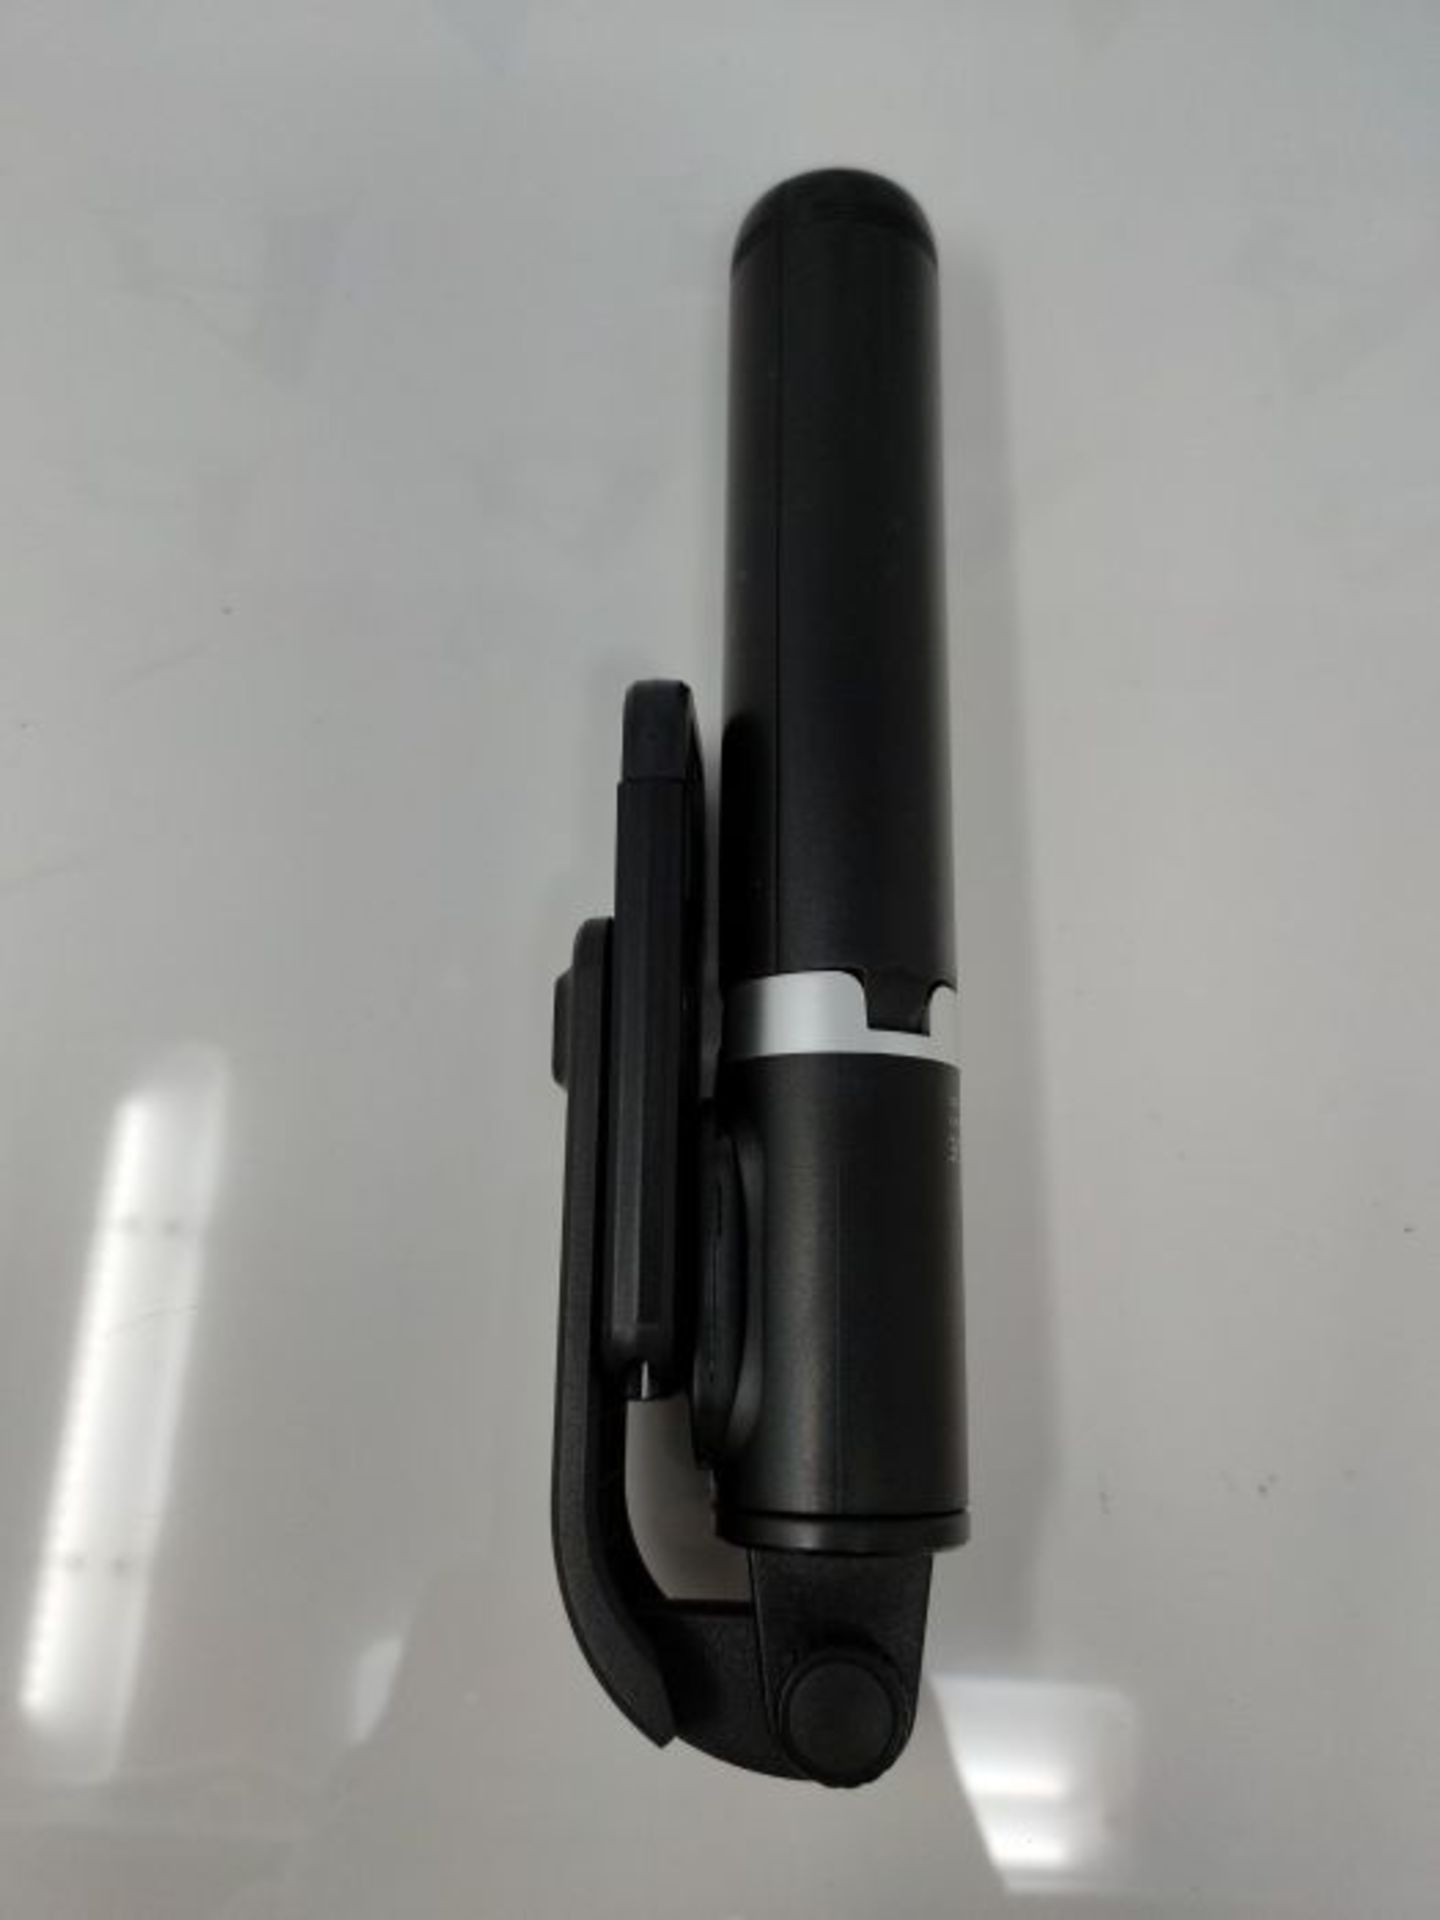 ATUMTEK 40? Selfie Stick, All in One Extendable Selfie Stick Tripod with Bluetooth Rem - Image 3 of 3